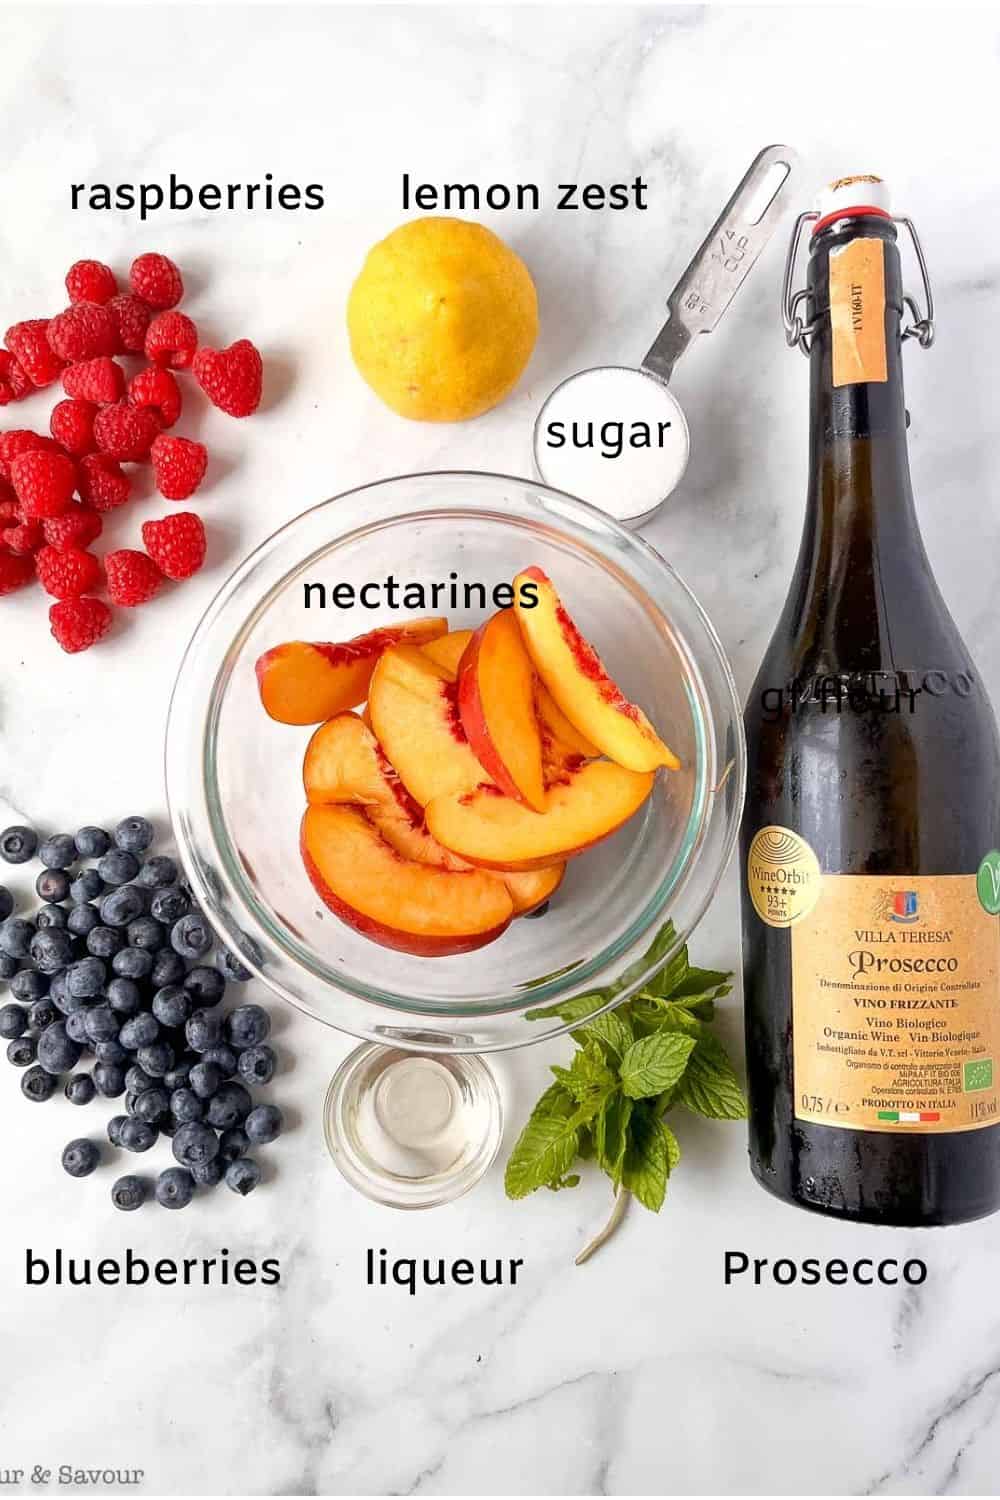 Labelled ingredients for nectarines and berries in Prosecco.